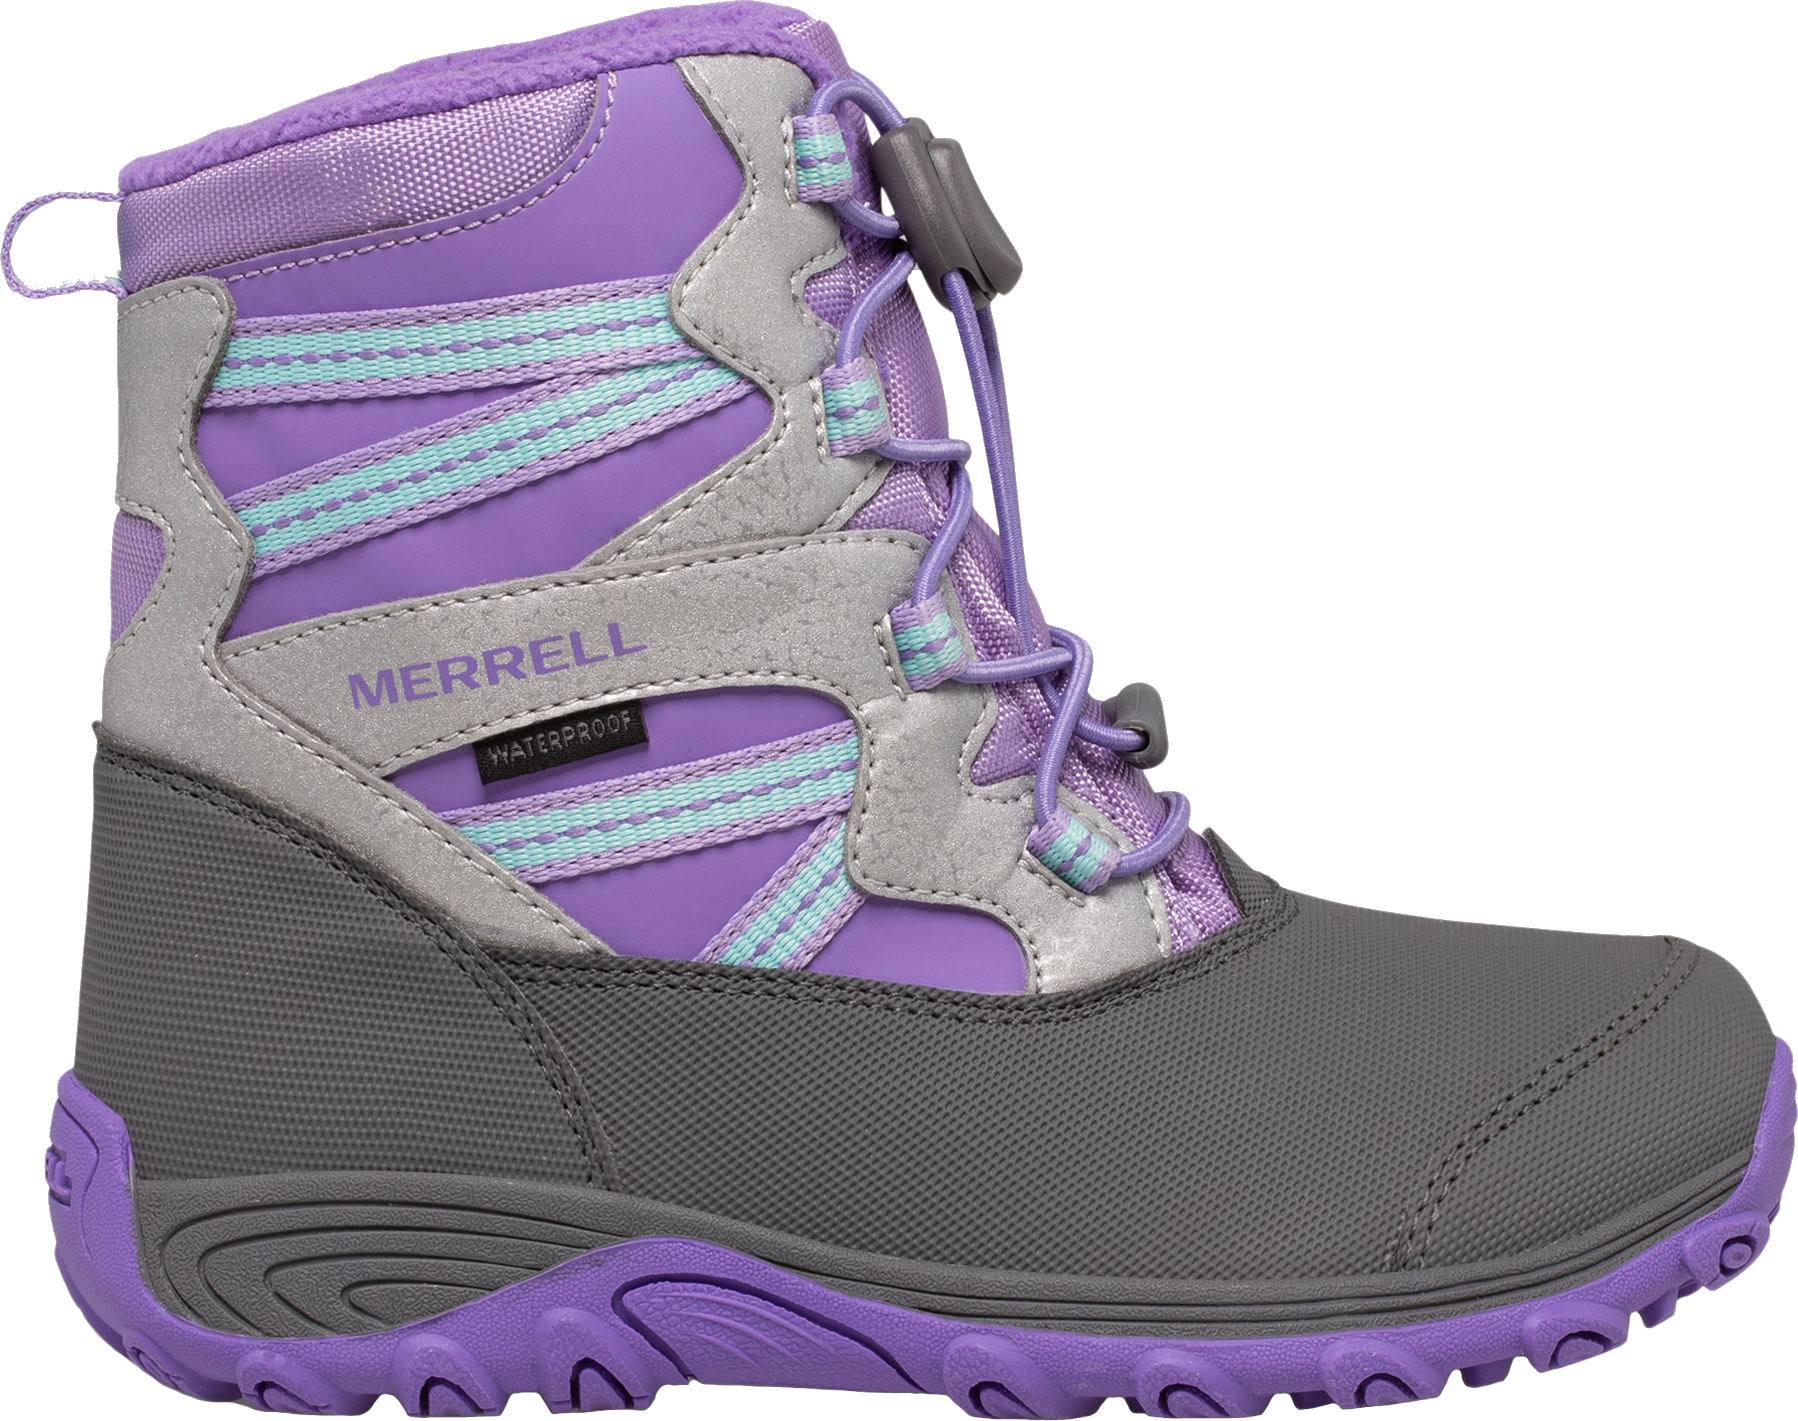 Merrell Kids’ Outback Snow Boot Purple/Silver